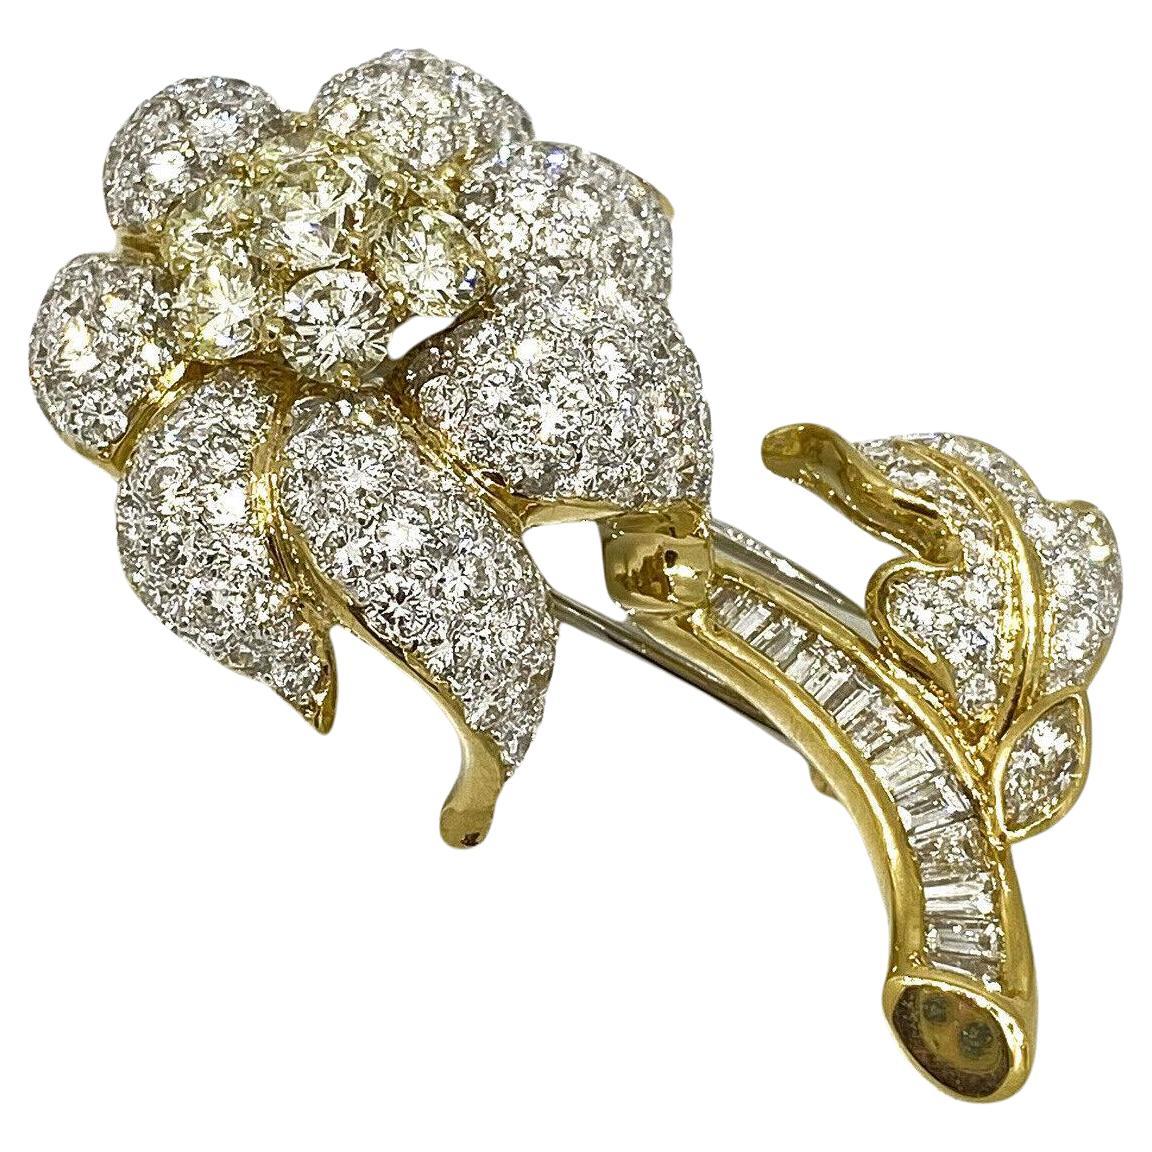 Estate Pave Diamond Flower Brooch / Pin in 18k Yellow Gold